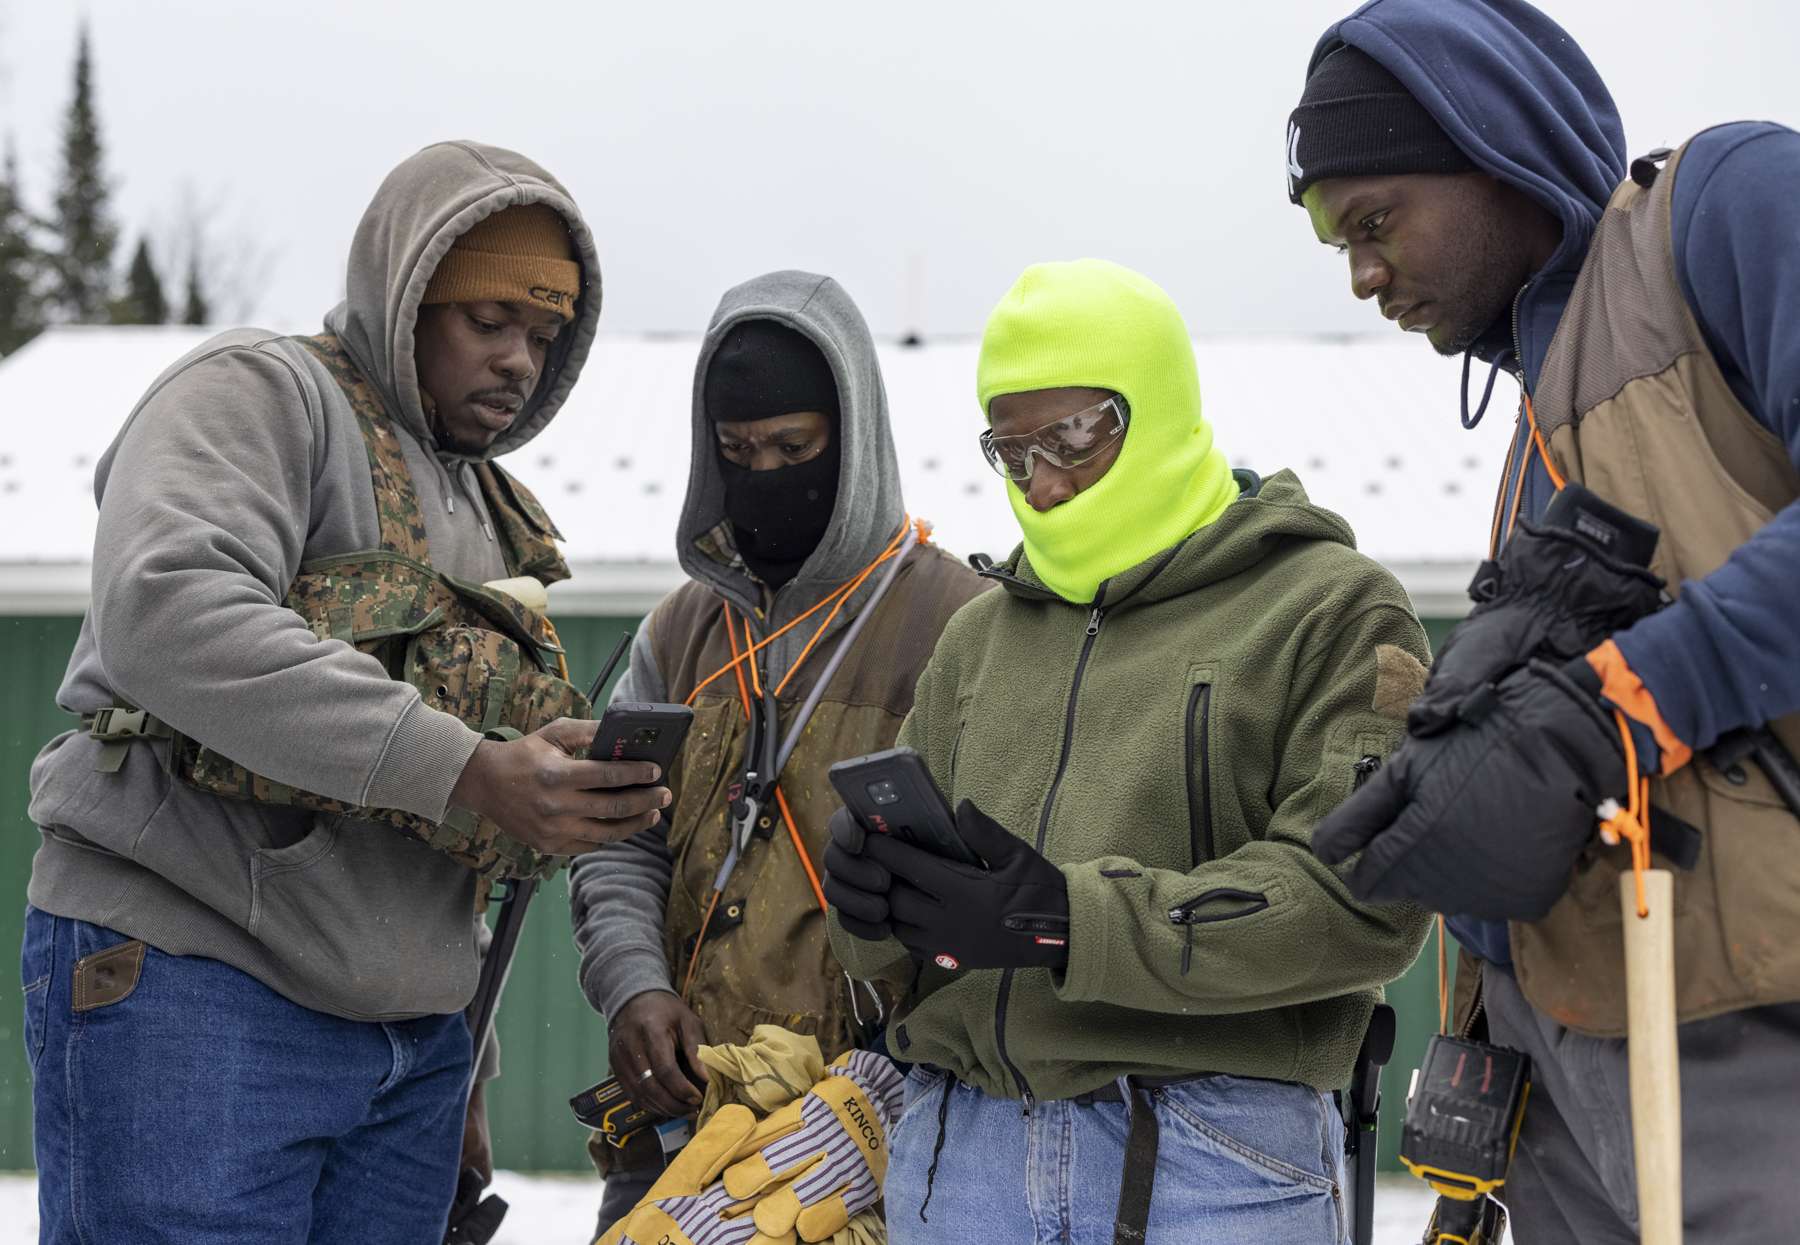 The crew familiarizes themselves with  company issued smart phones and a app designed for keeping track of progress during the tapping season. The managers use the data for planning purposes. Photo by Mike Lynch